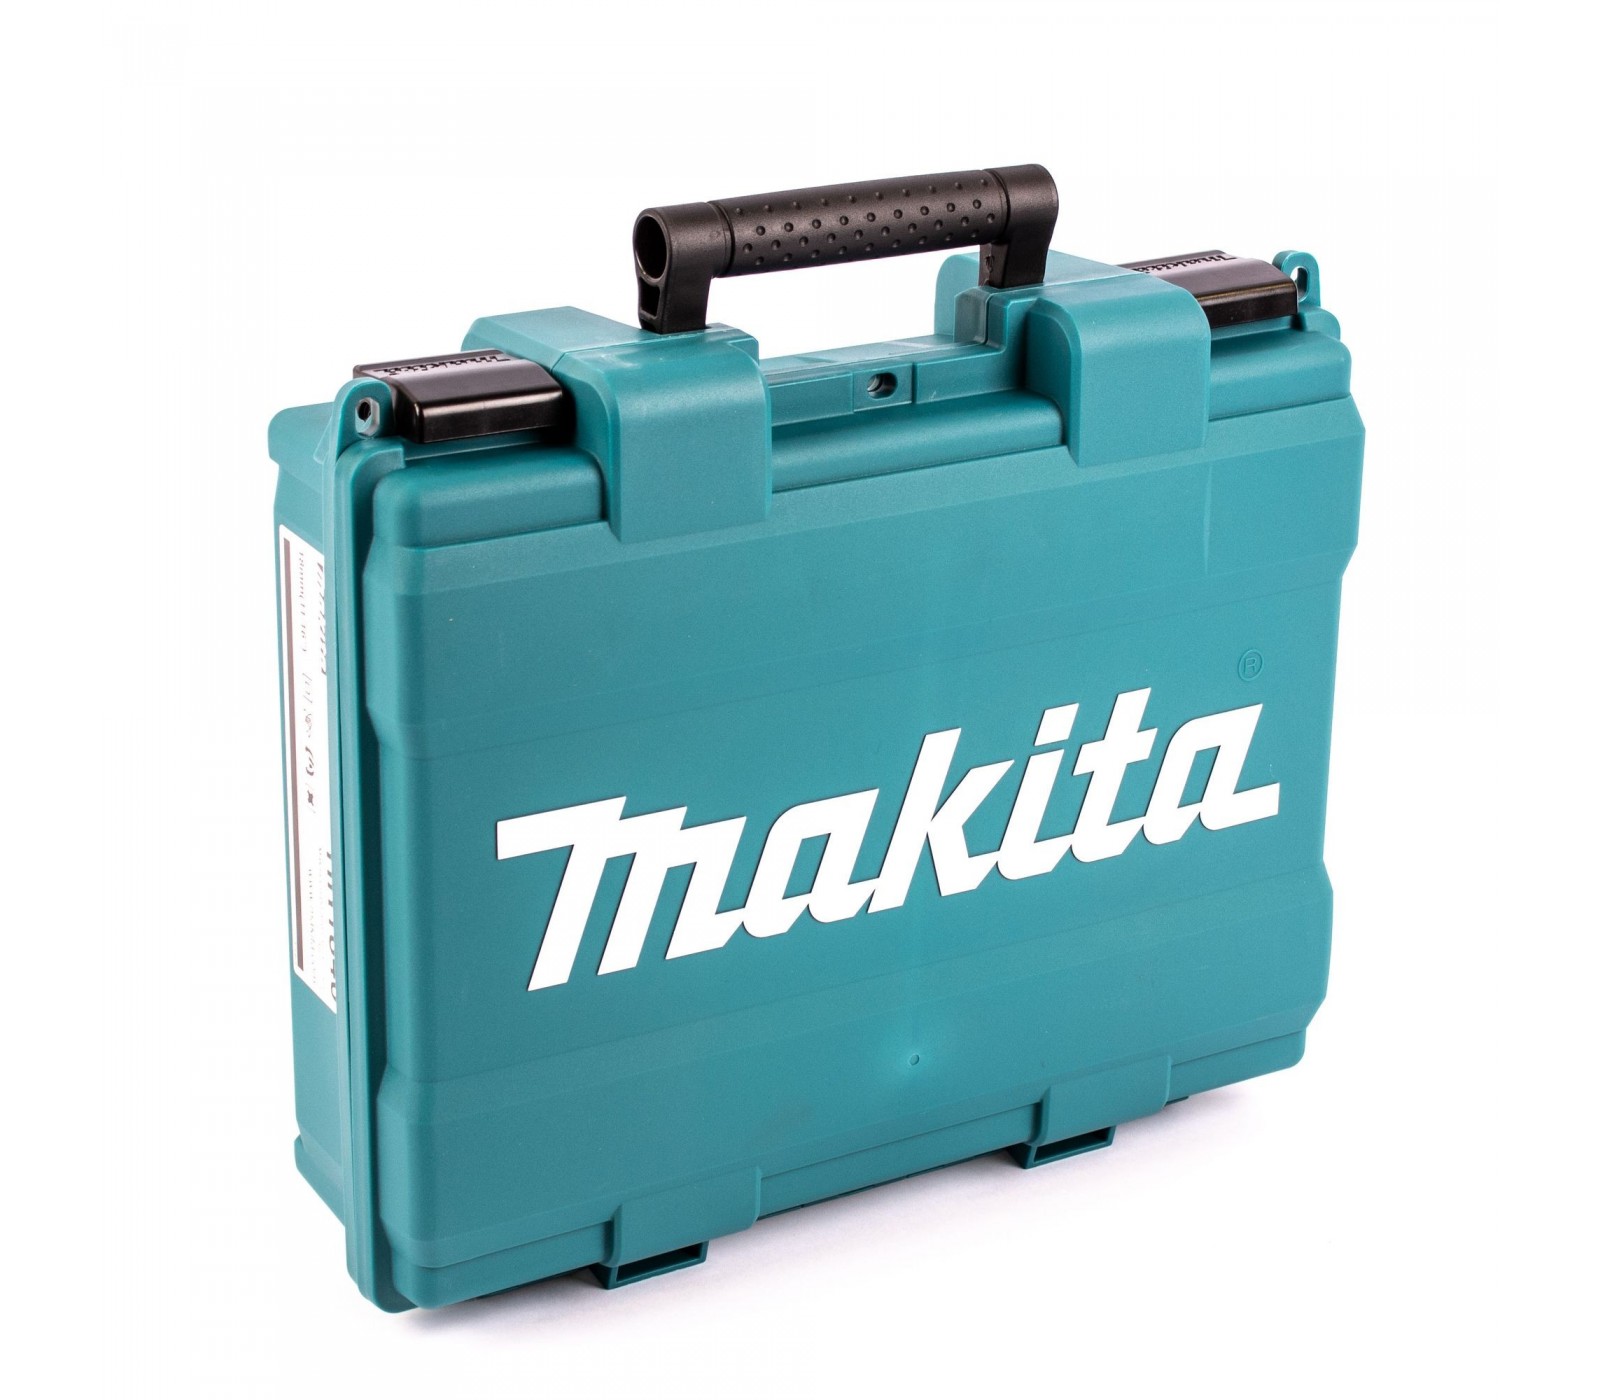 Makita HR1840 SDS Drill Rotary 18mm Capacity With Carry Case 110v Or 240v 